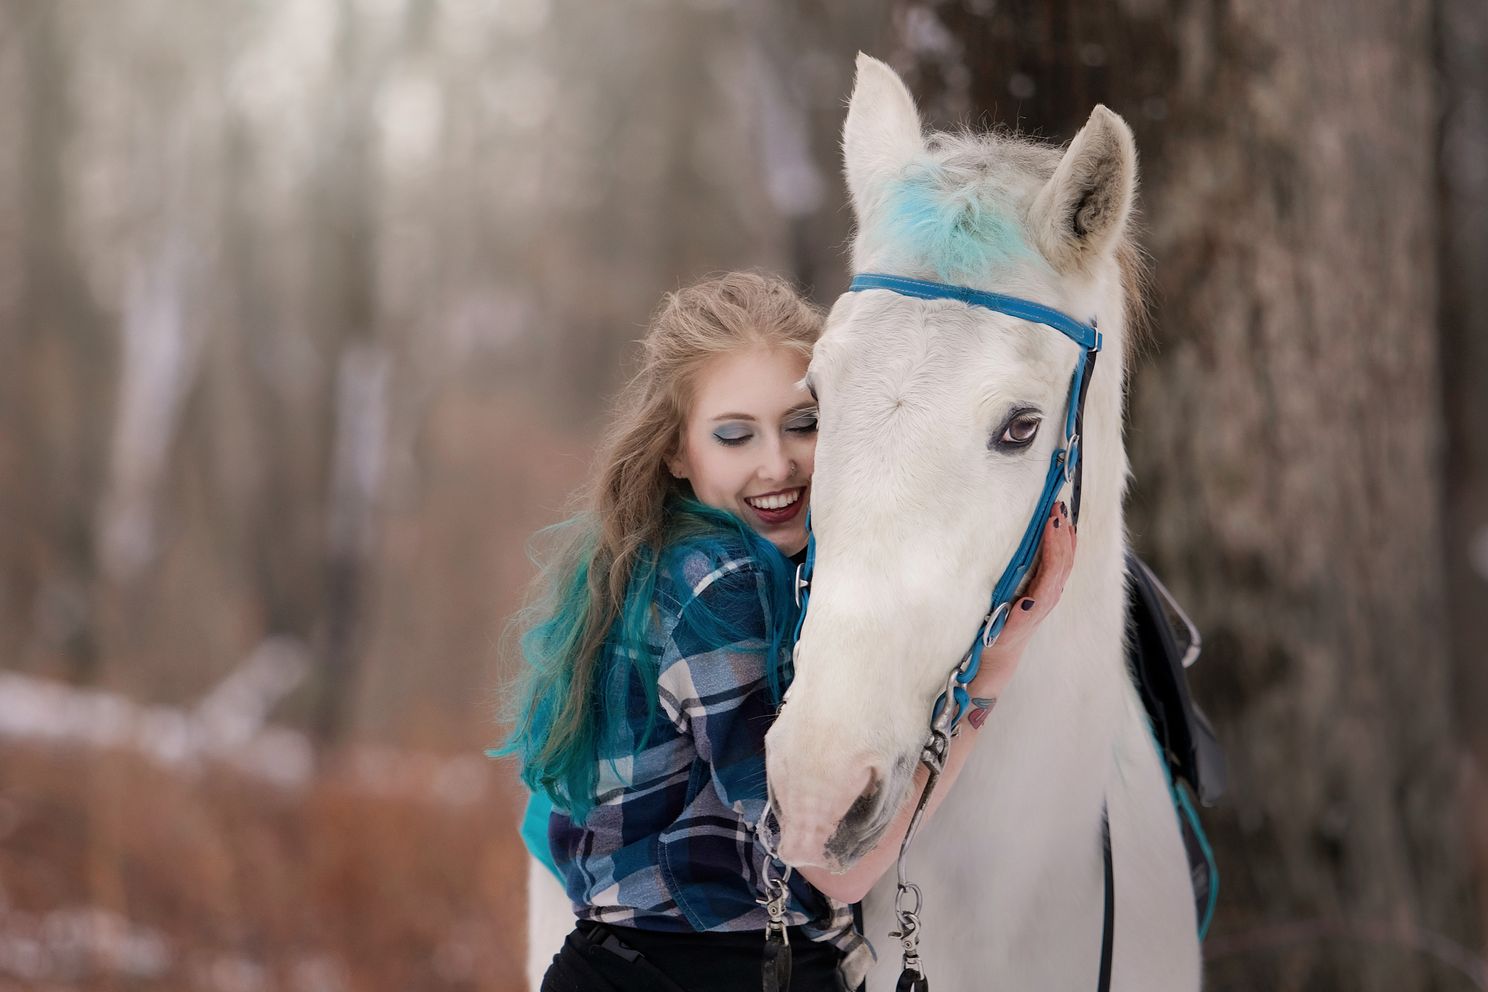 Woman-and-horse-in-woods.jpg 1